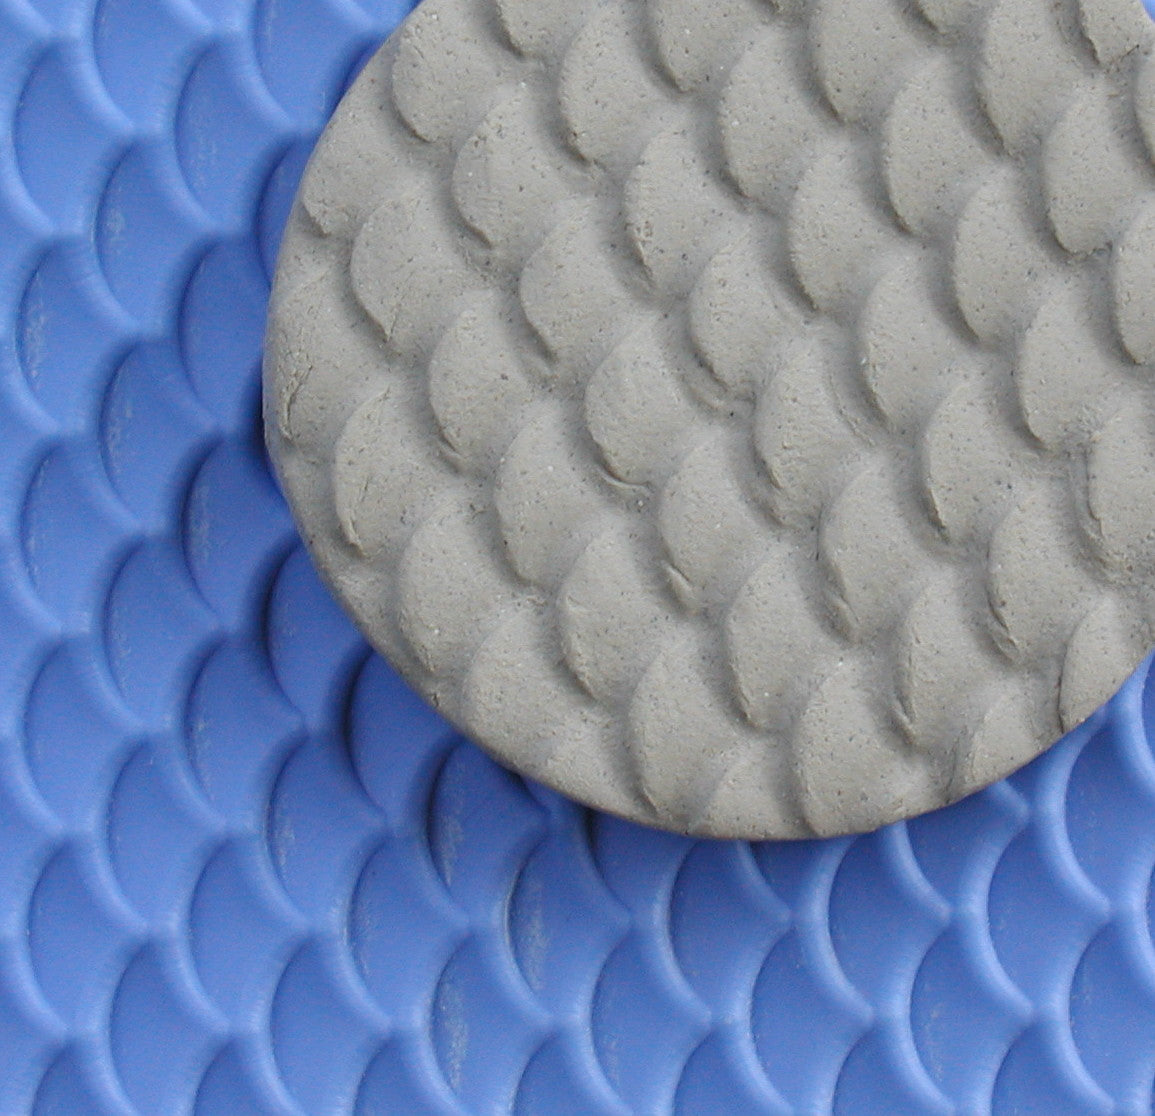 Chinese Clay Art USA Plastic Texture Mats, Dragon Scales Pattern image 1